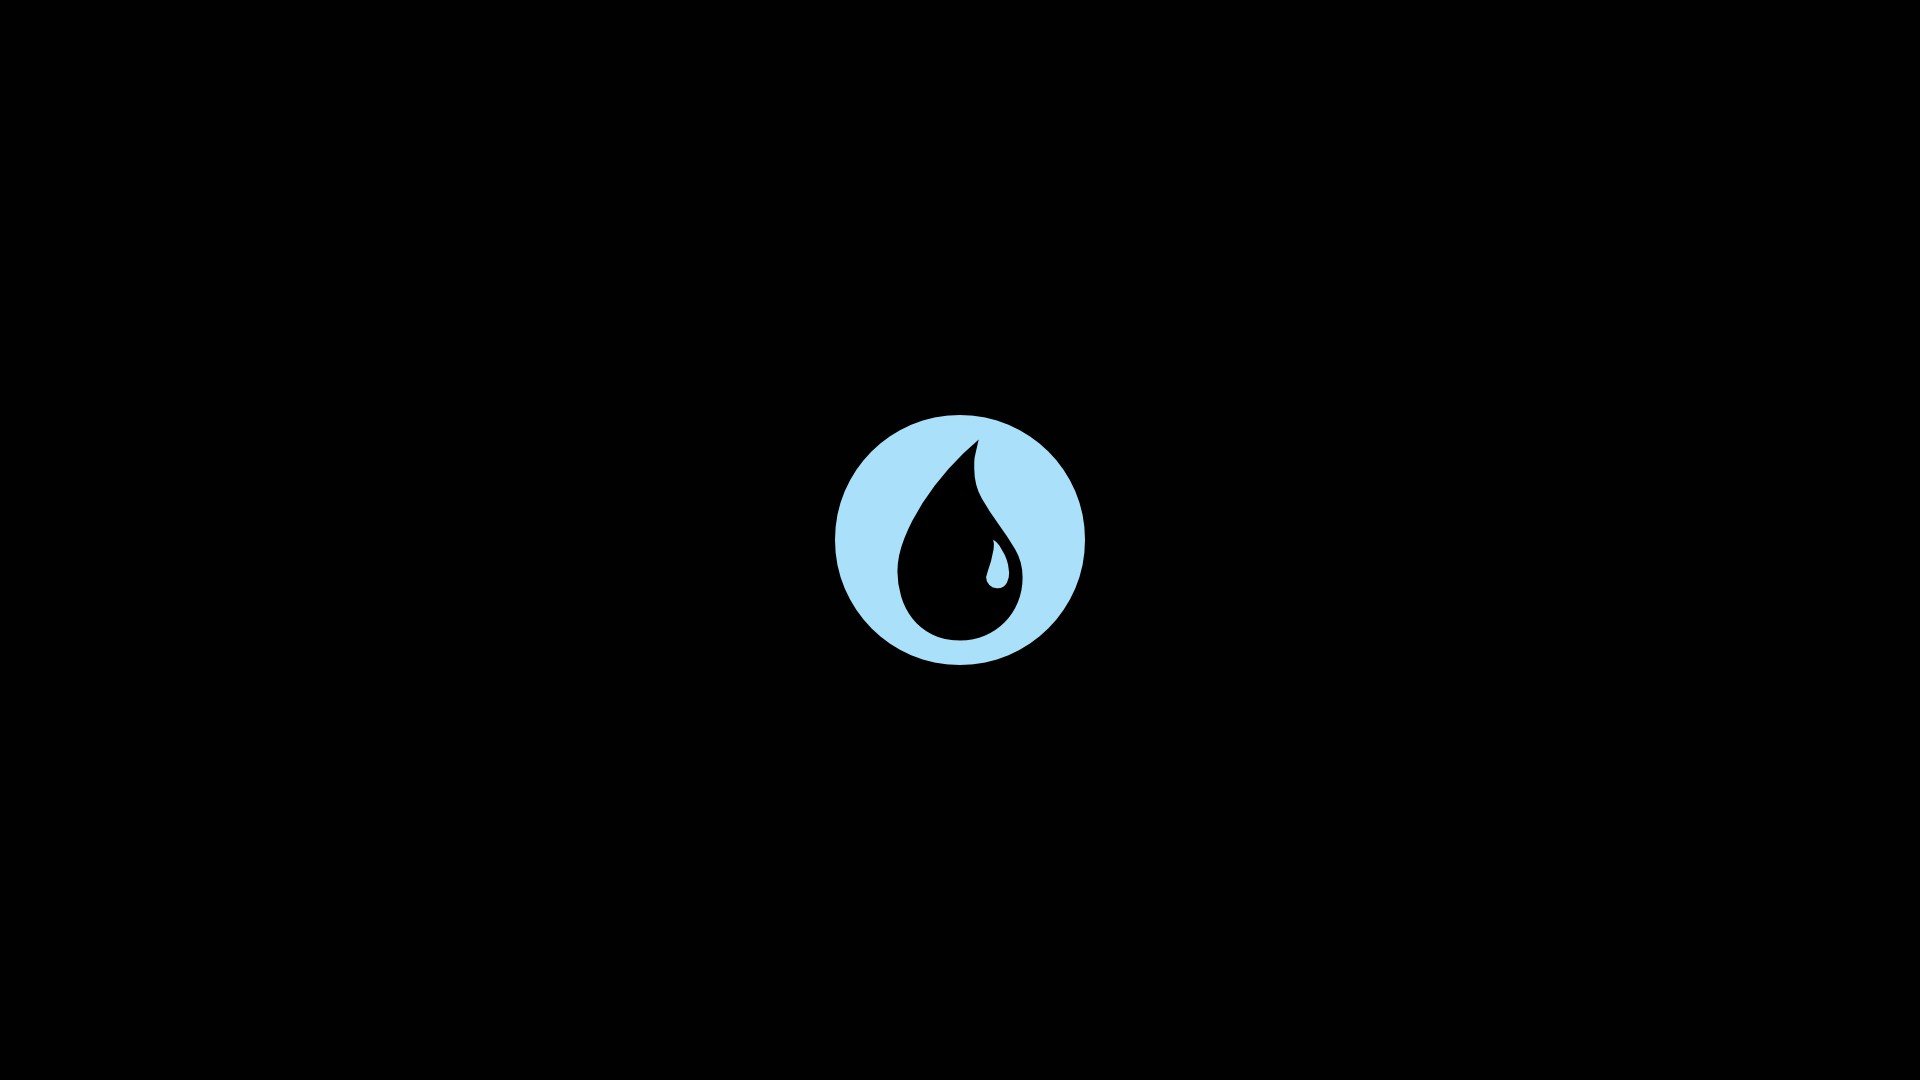 Magic: The Gathering, Trading Card Games, Simple, Minimalism, Black background, Water, Water drops Wallpaper